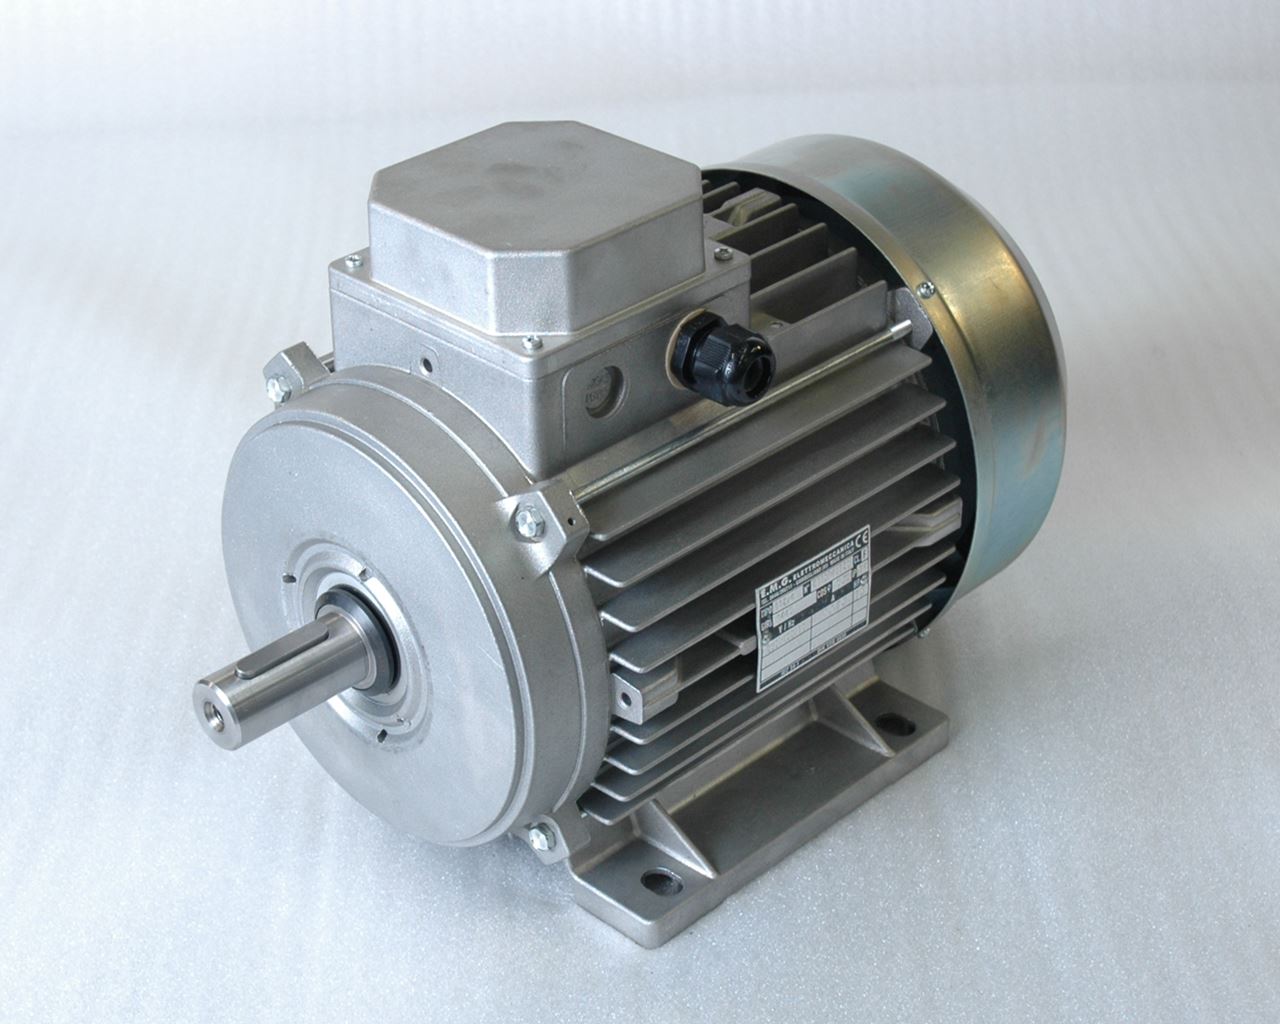 Lift table spare part - Motor 4,0/4/400/B3